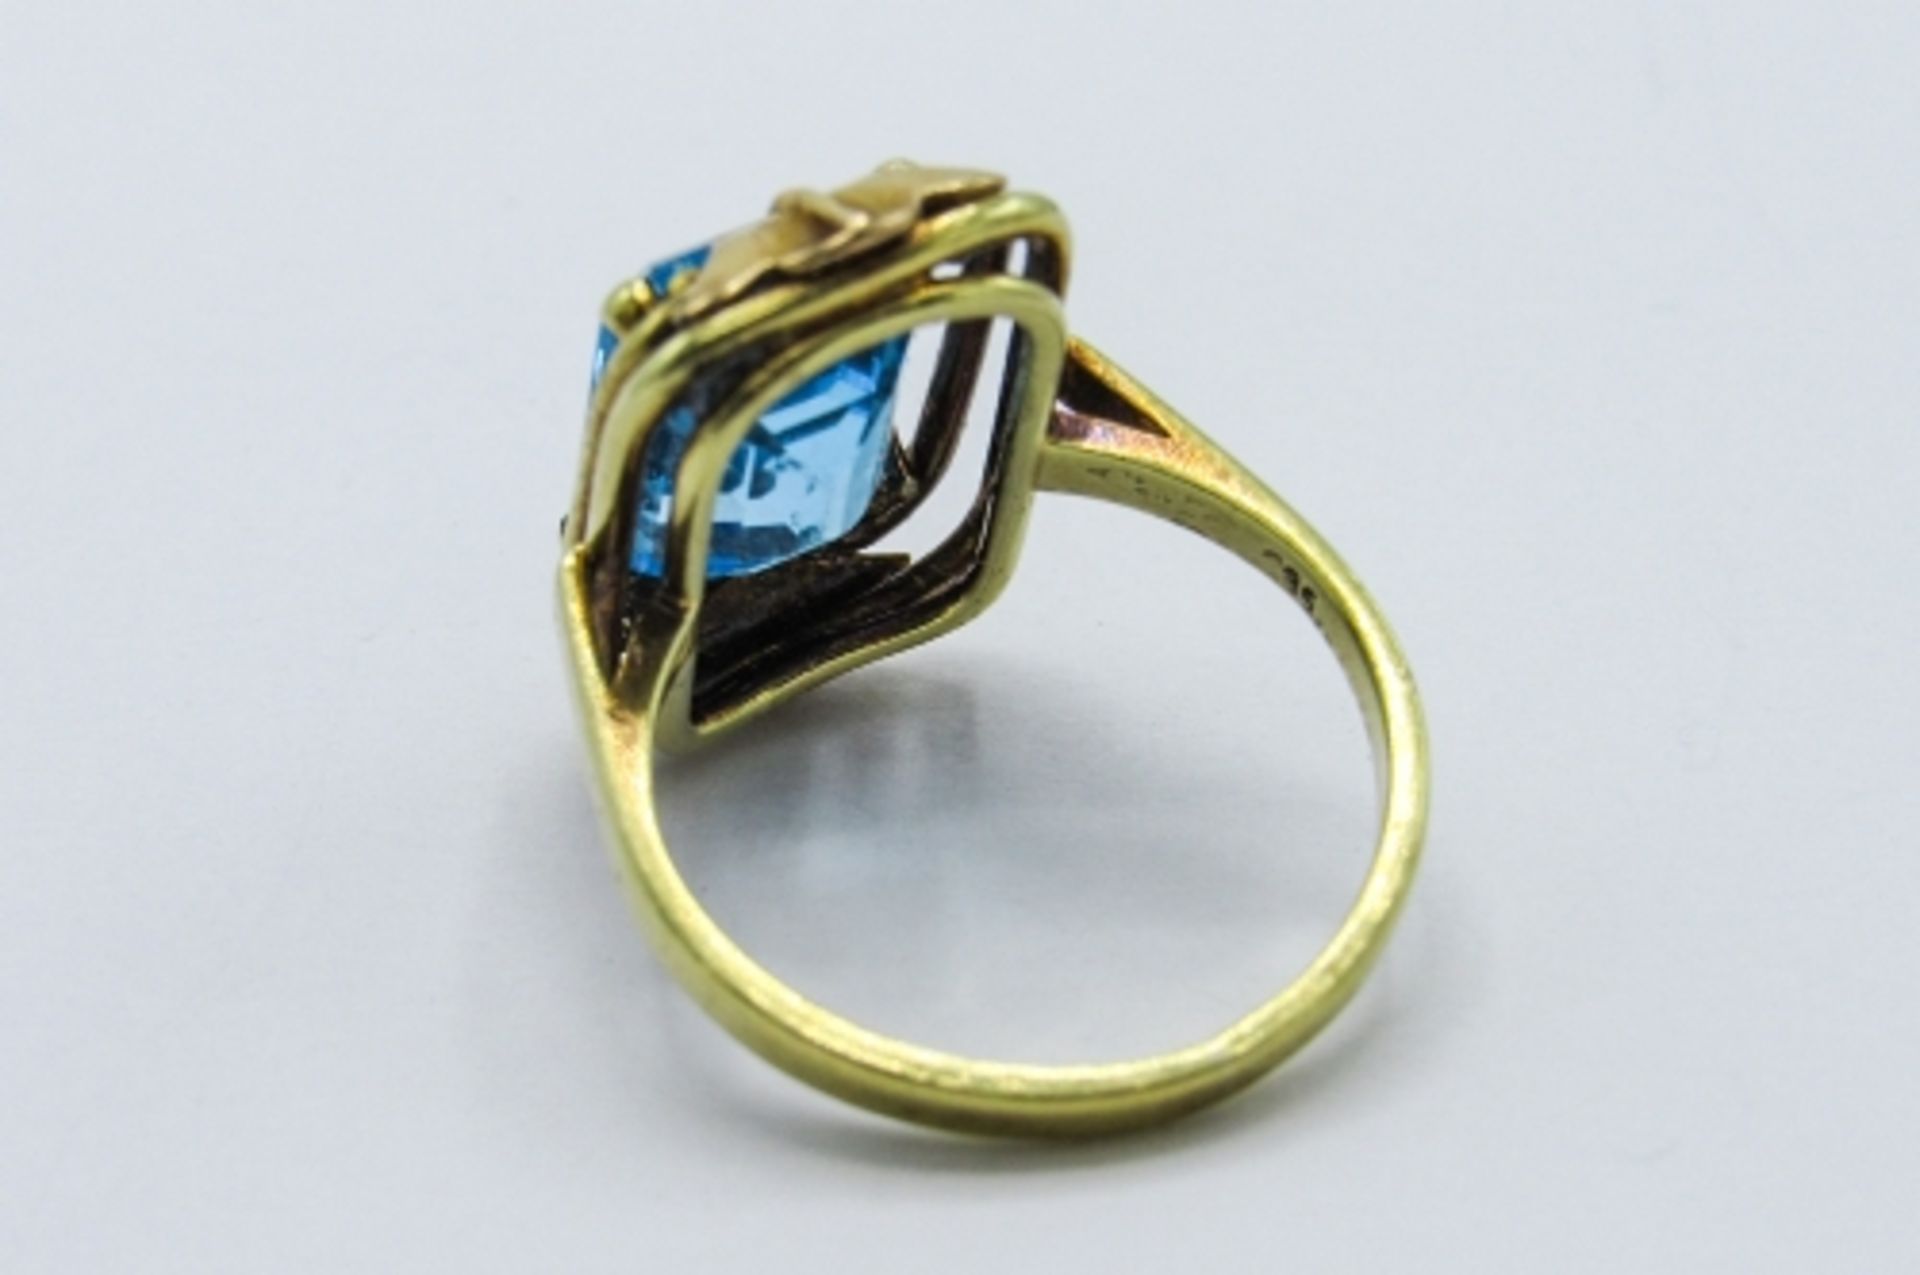 14ct gold Art Deco topaz ring, weight 6gms, size N. Estimate £275-300 - Image 4 of 5